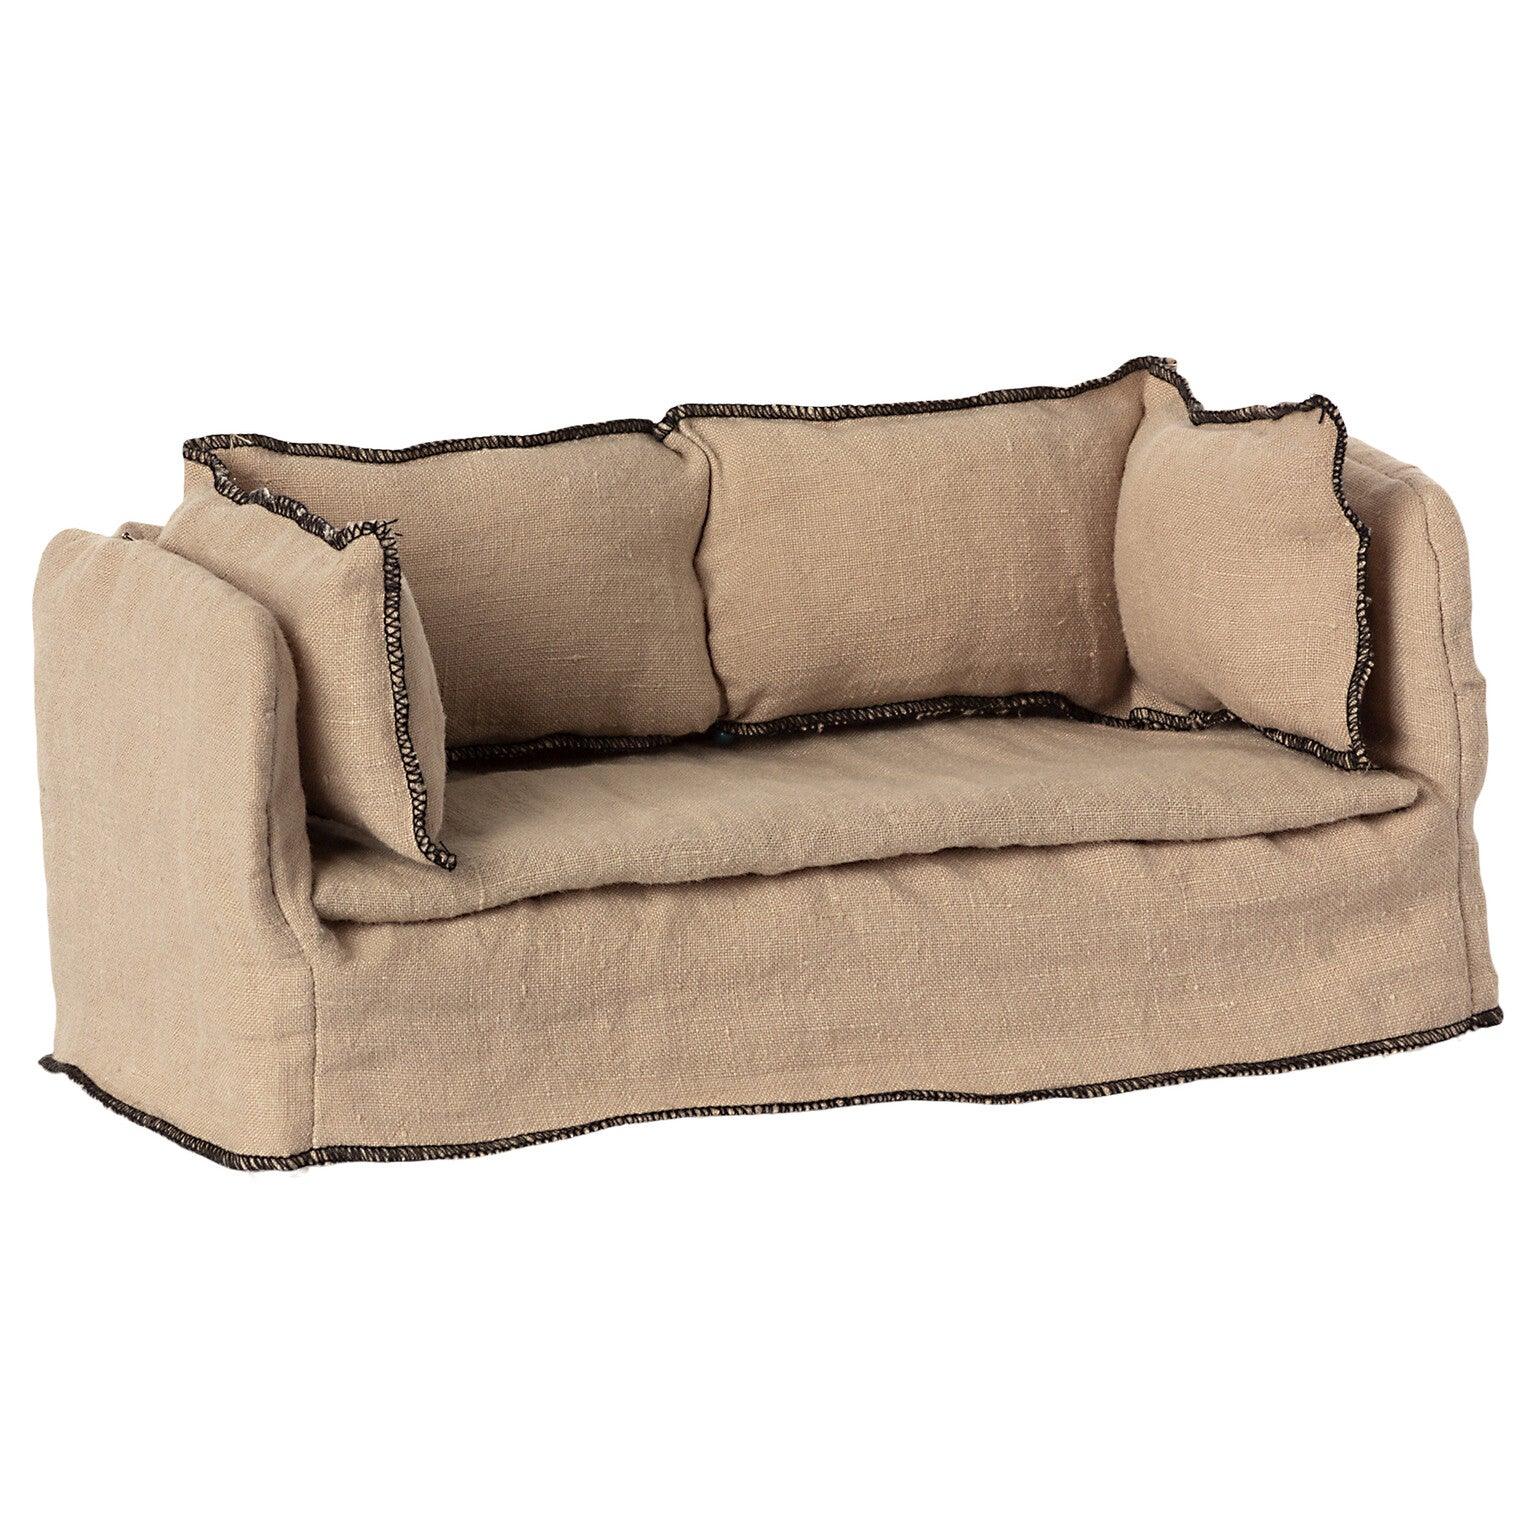 Maileg: soft couch for cuddly Miniature Couch